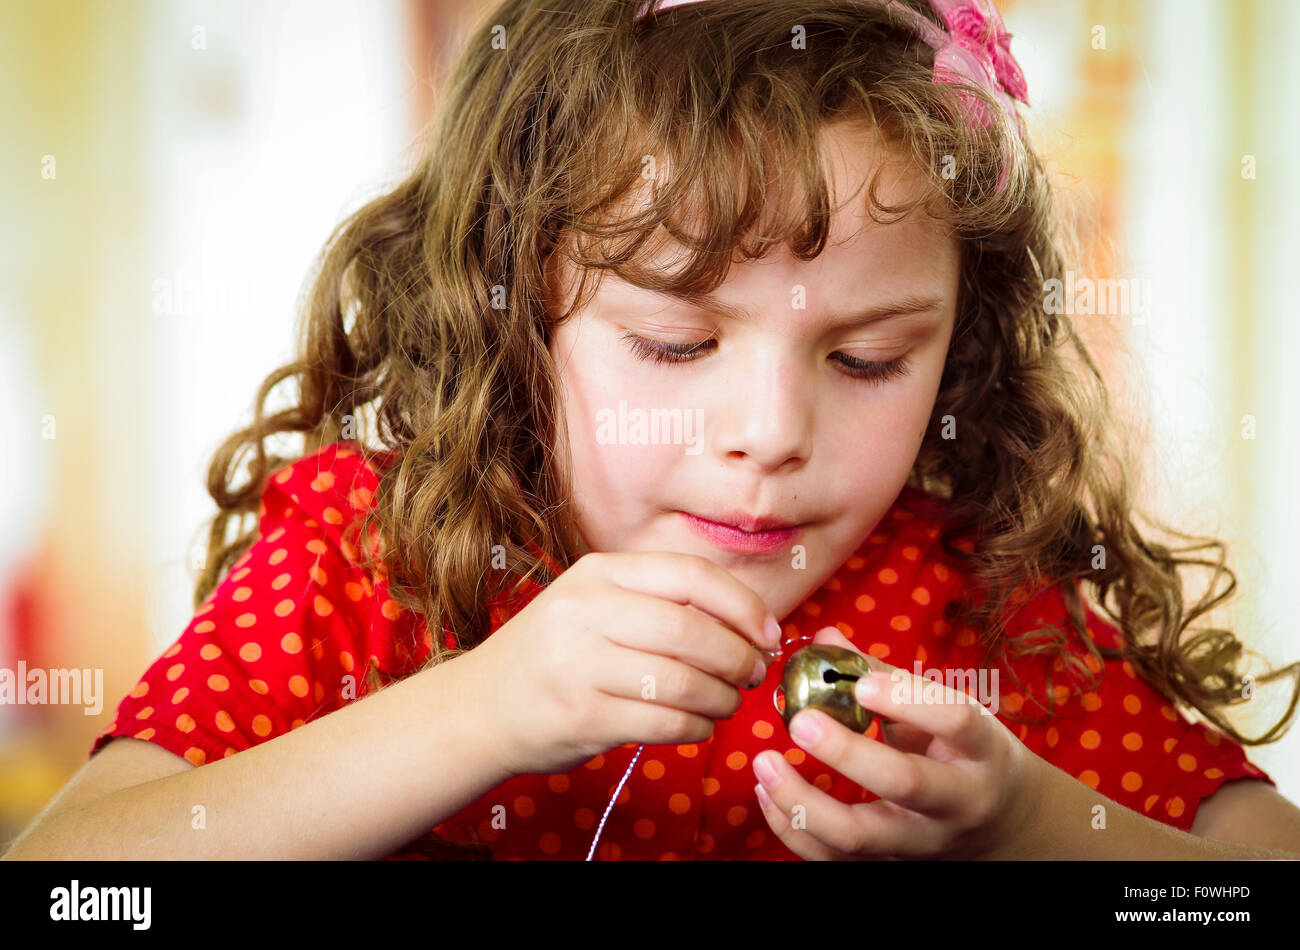 Adorable little girl making crafts Stock Photo